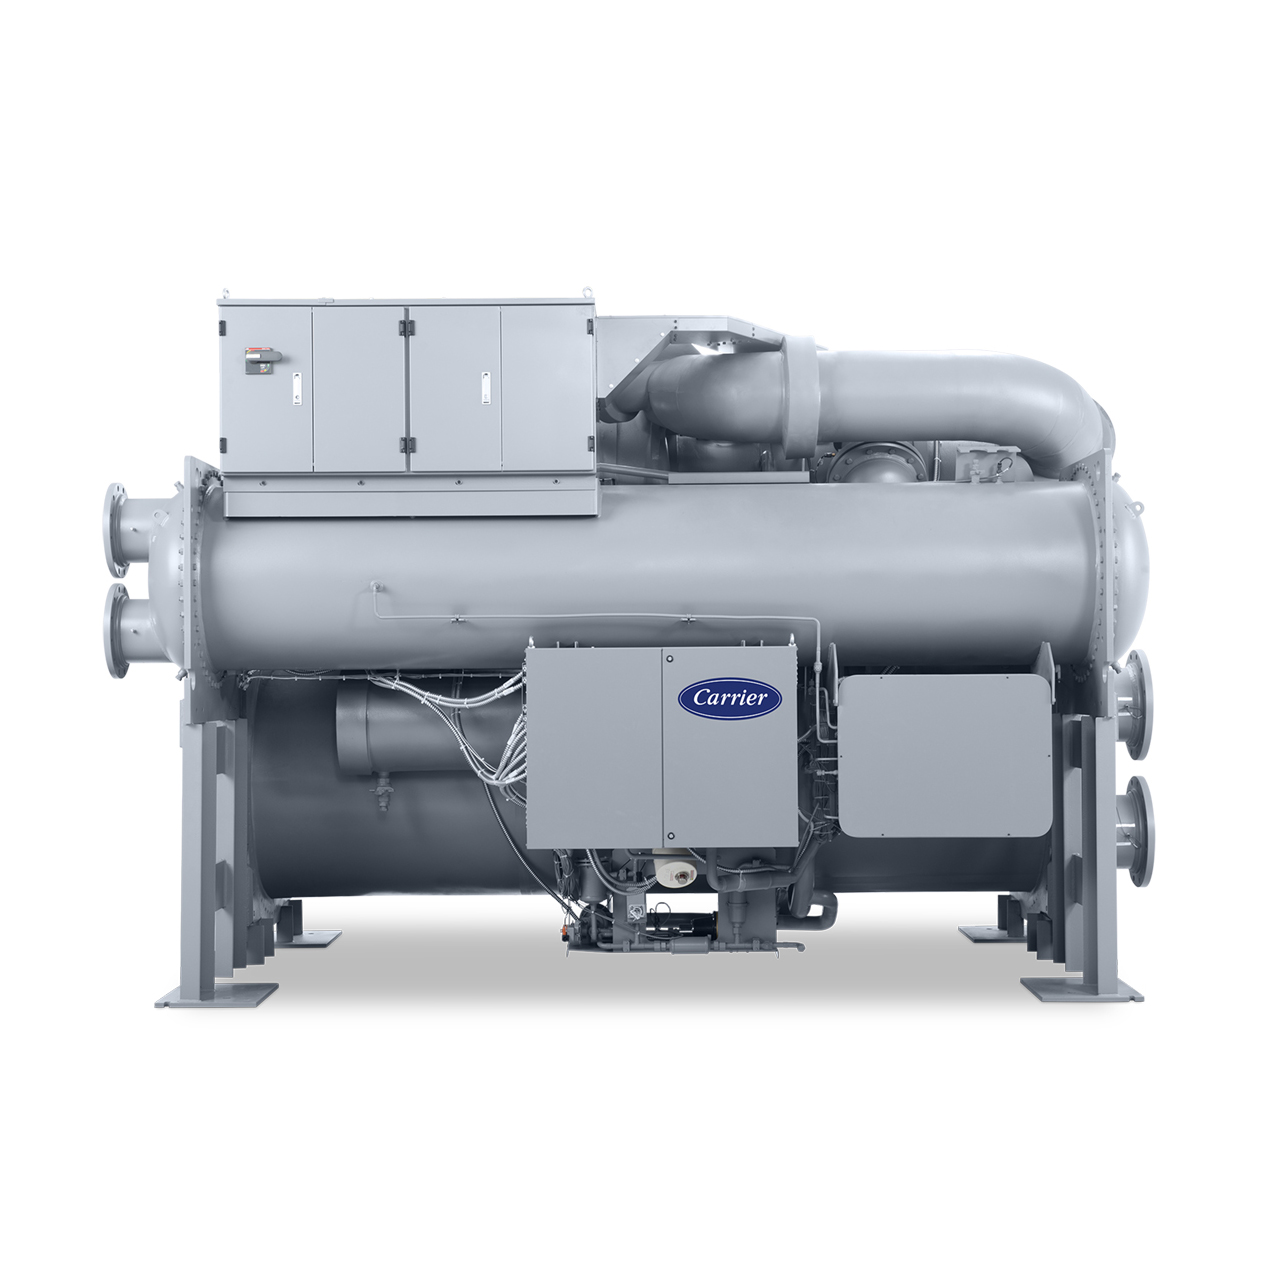 The AquaEdge® 19DV Water-Cooled Centrifugal Chiller is the Ultimate Innovation in Heating and Cooling Technology.